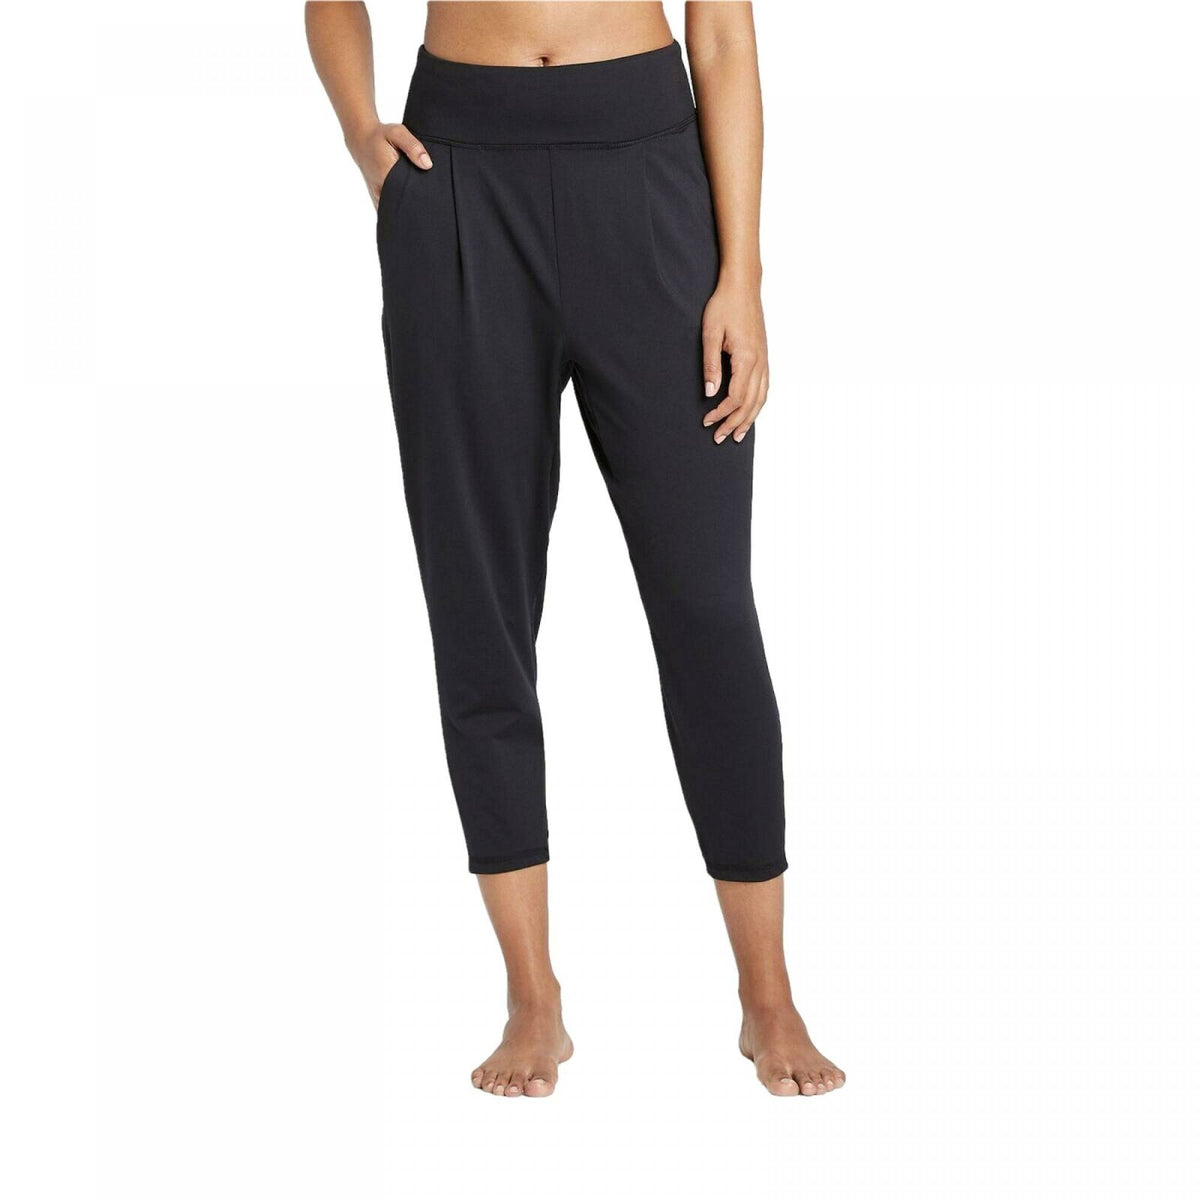 All In Motion Women's Loose Fit Mid-Rise Practice Leggings Pants